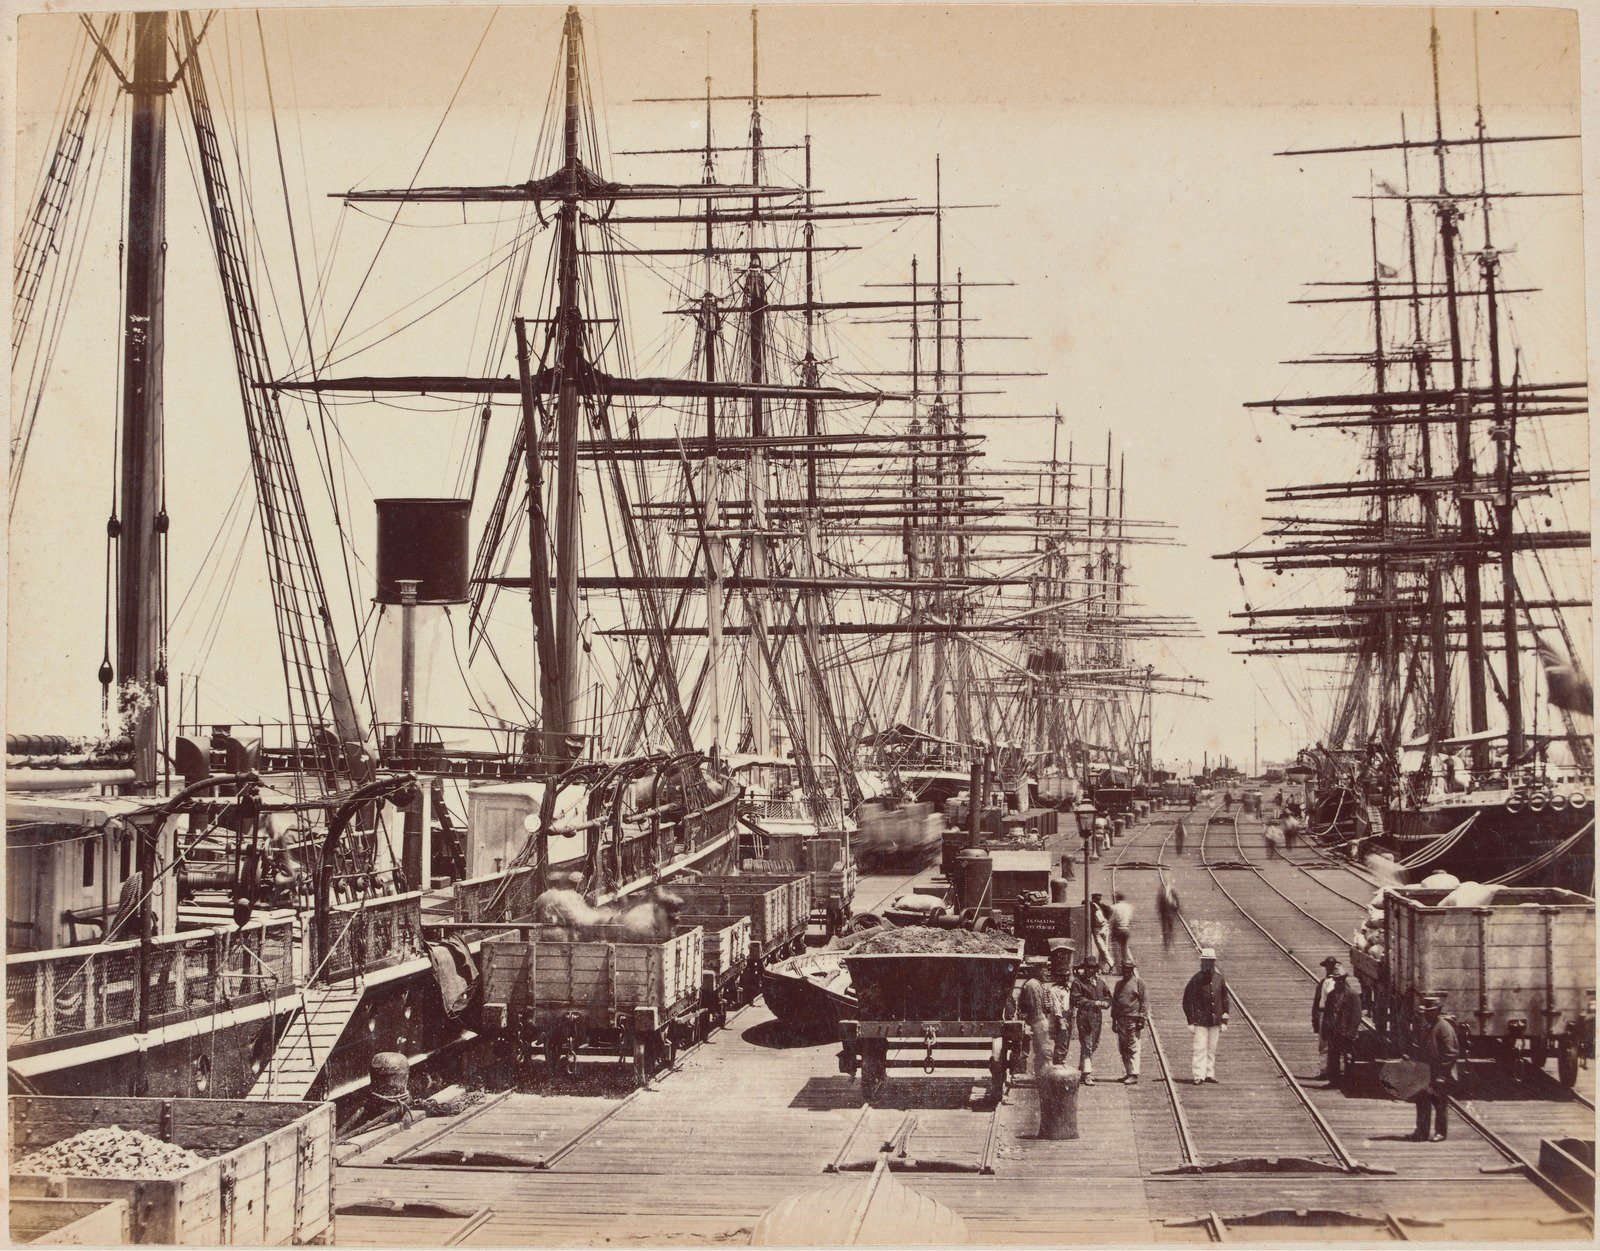 Image of  boats anchored at Station Pier known as Sandridge , image late 19th century